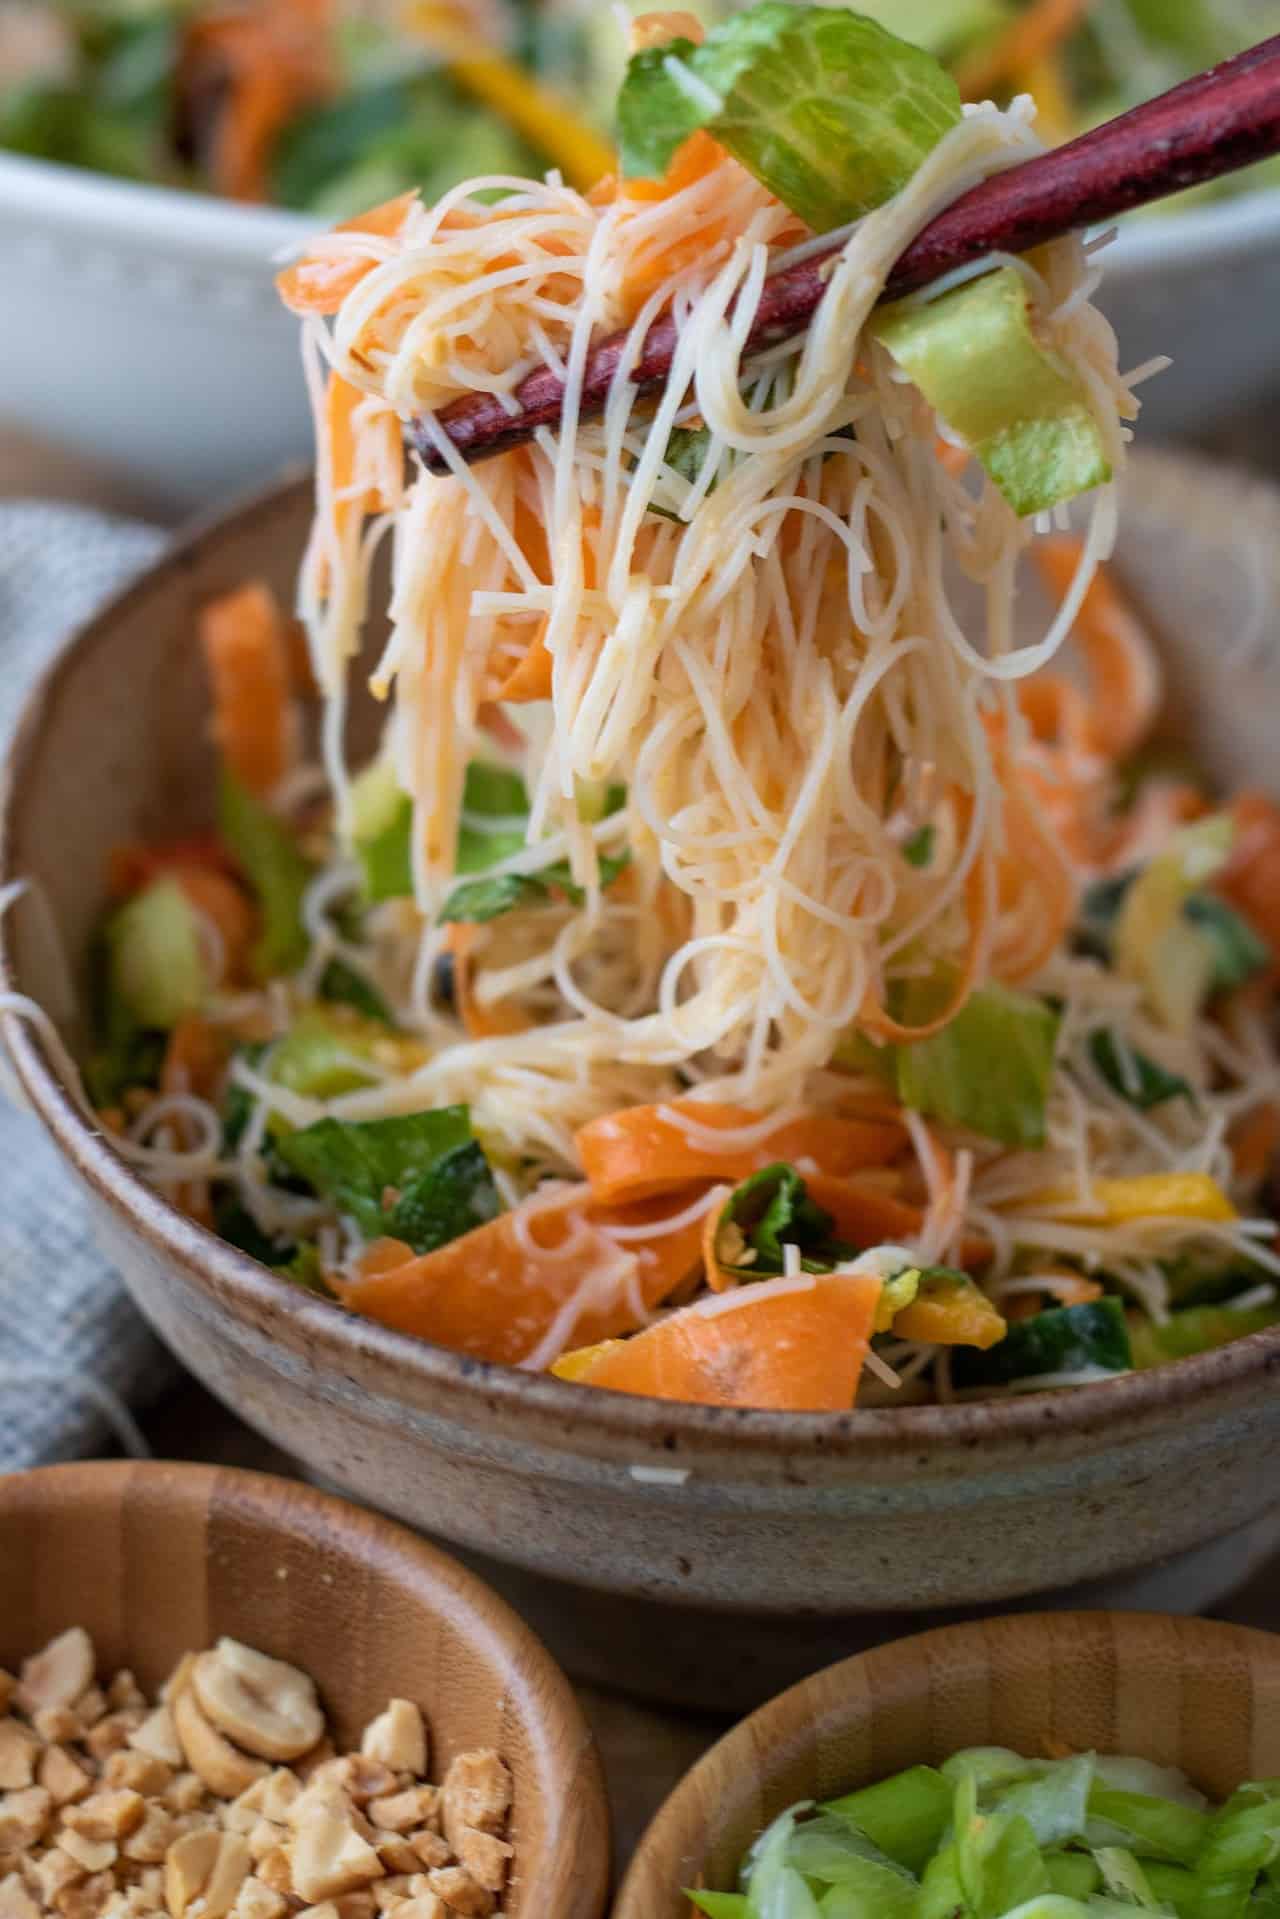 A brown speckled bowl filled with Asian noodle salad. Two chopsticks are holding up a mouthful of noodles. There's carrots, cucumbers and other veggies.